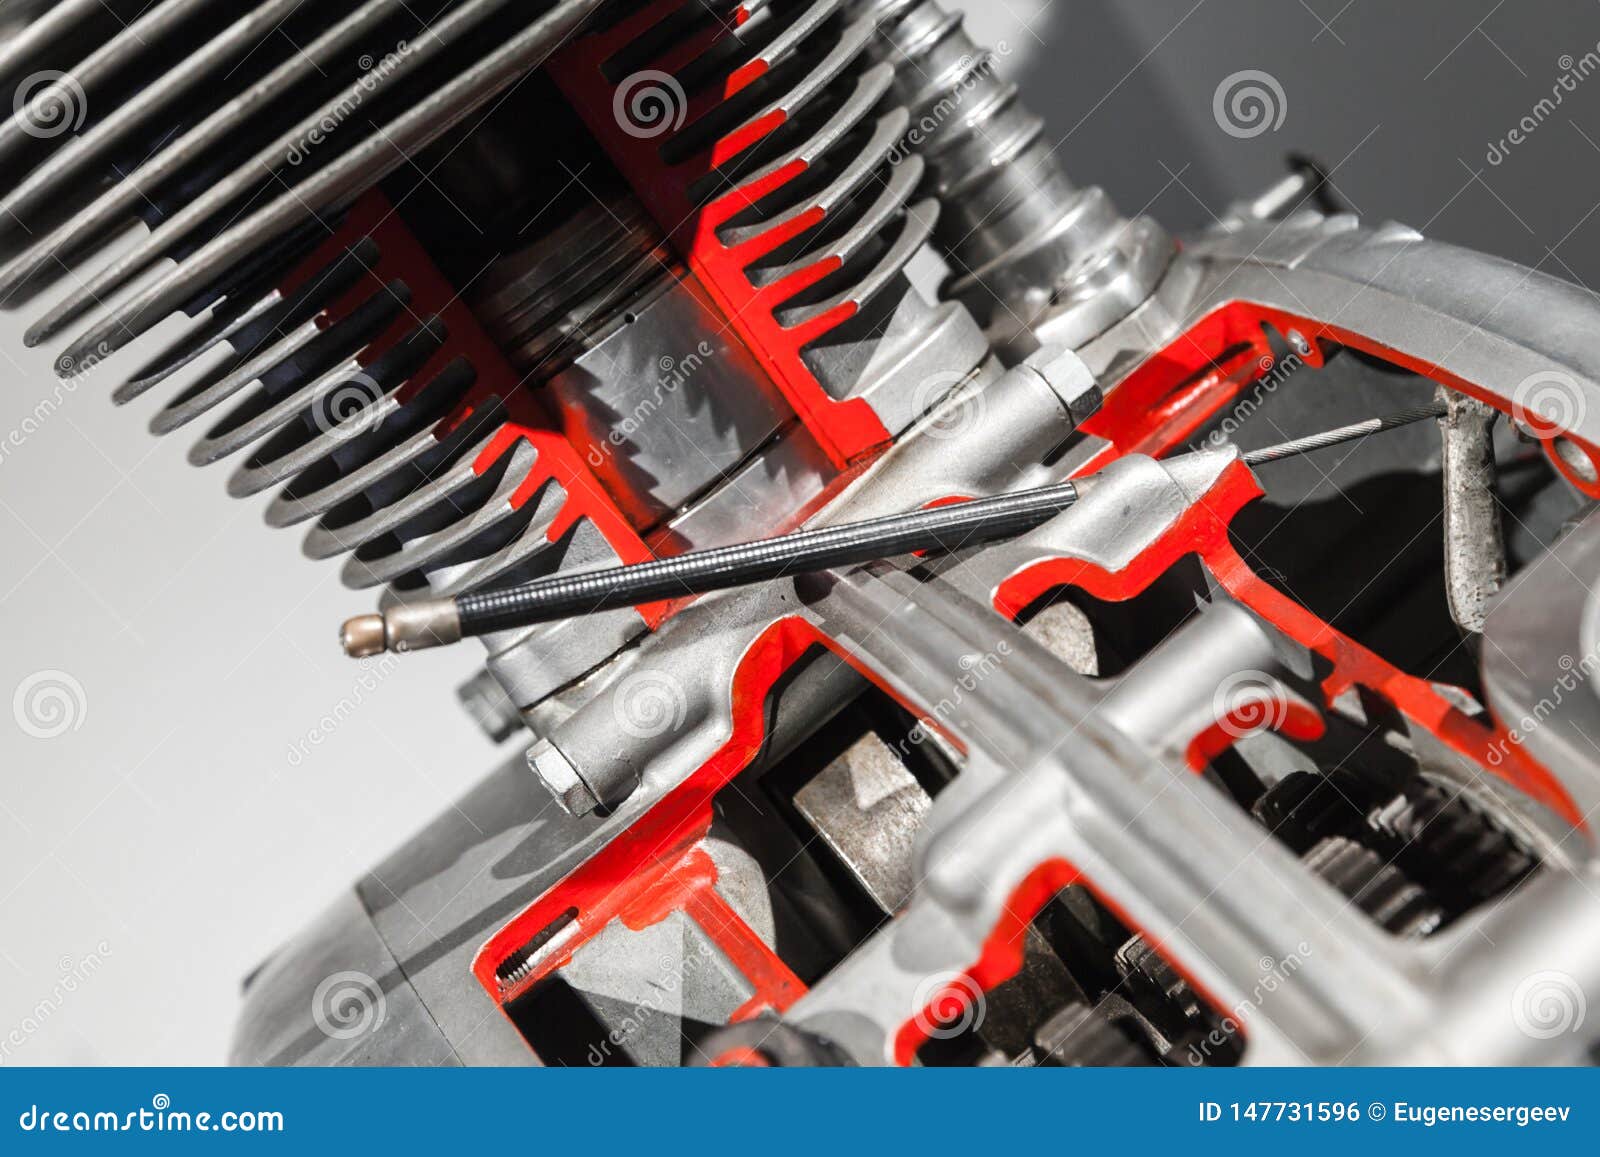 128 Cc Model Photos Free Royalty Free Stock Photos From Dreamstime